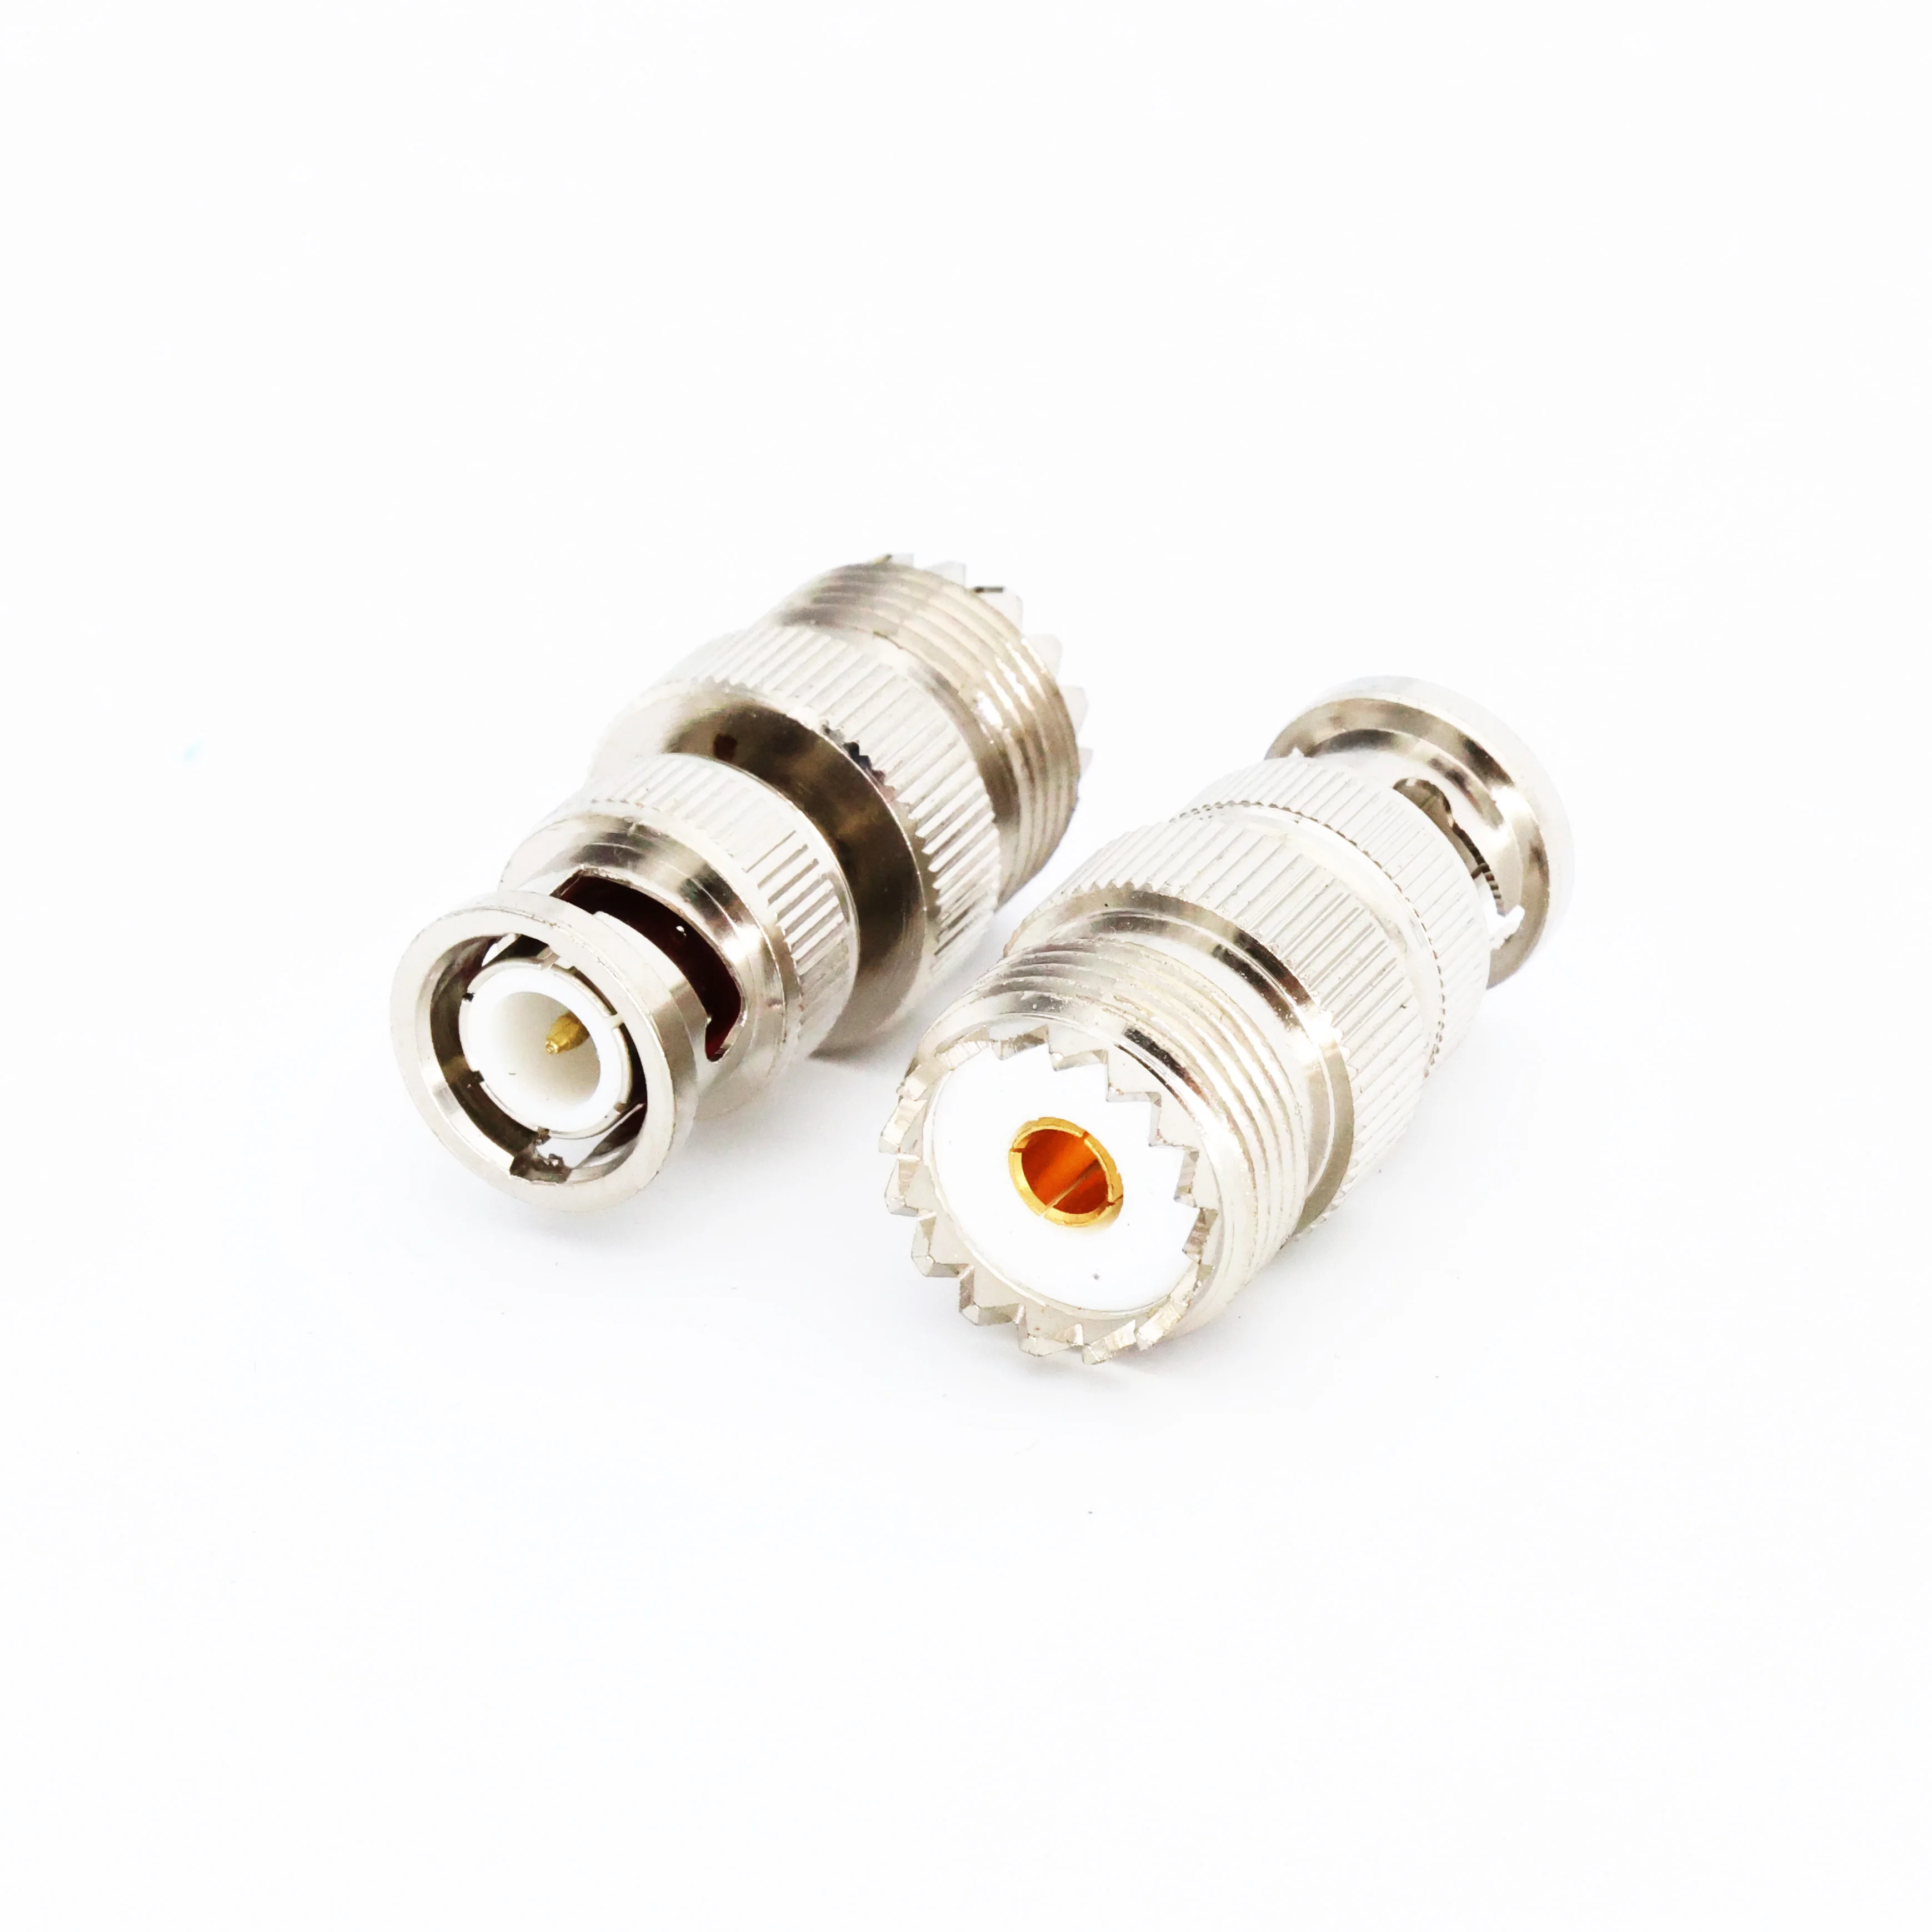 2pcs Cleqee BNC Male to UHF SO239 PL-259 Female RF Coaxial Adapter BNC to UHF Coax Jack Connector free shipping 2pcs p 330 p 046e p 004e p 029e p 037e power plug female rhodium plated gold plating copper connector